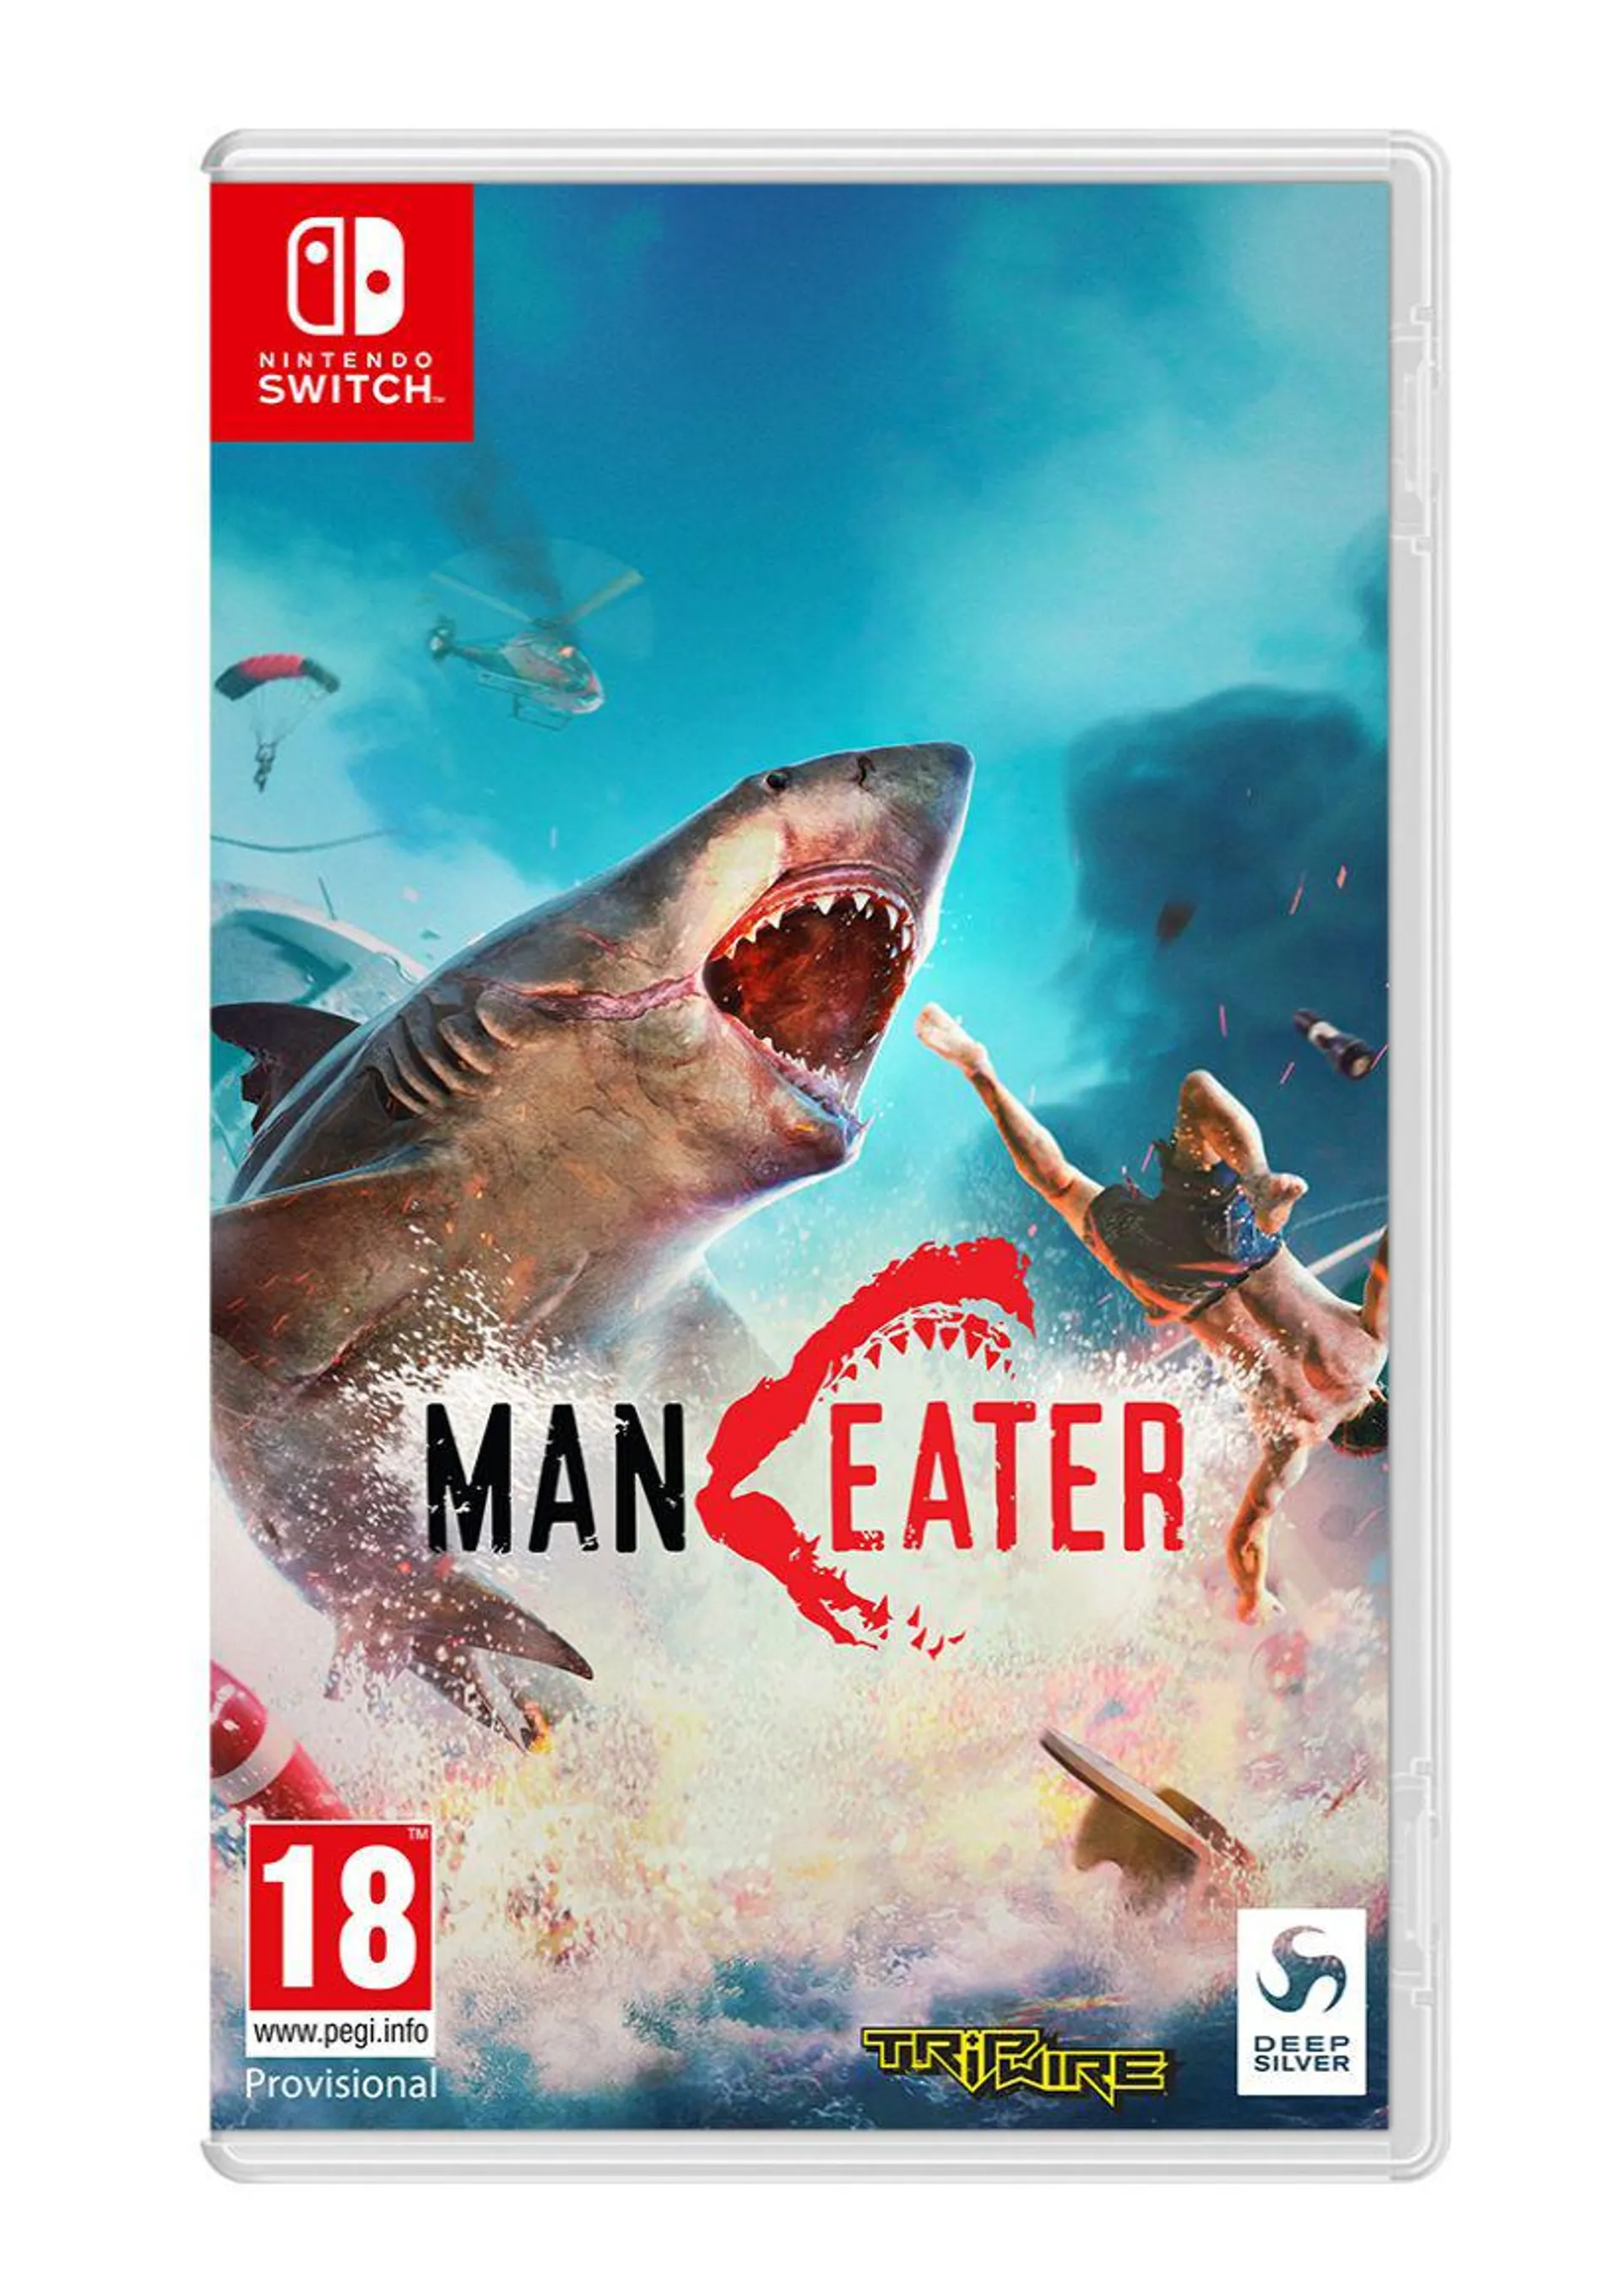 Maneater on Nintendo Switch